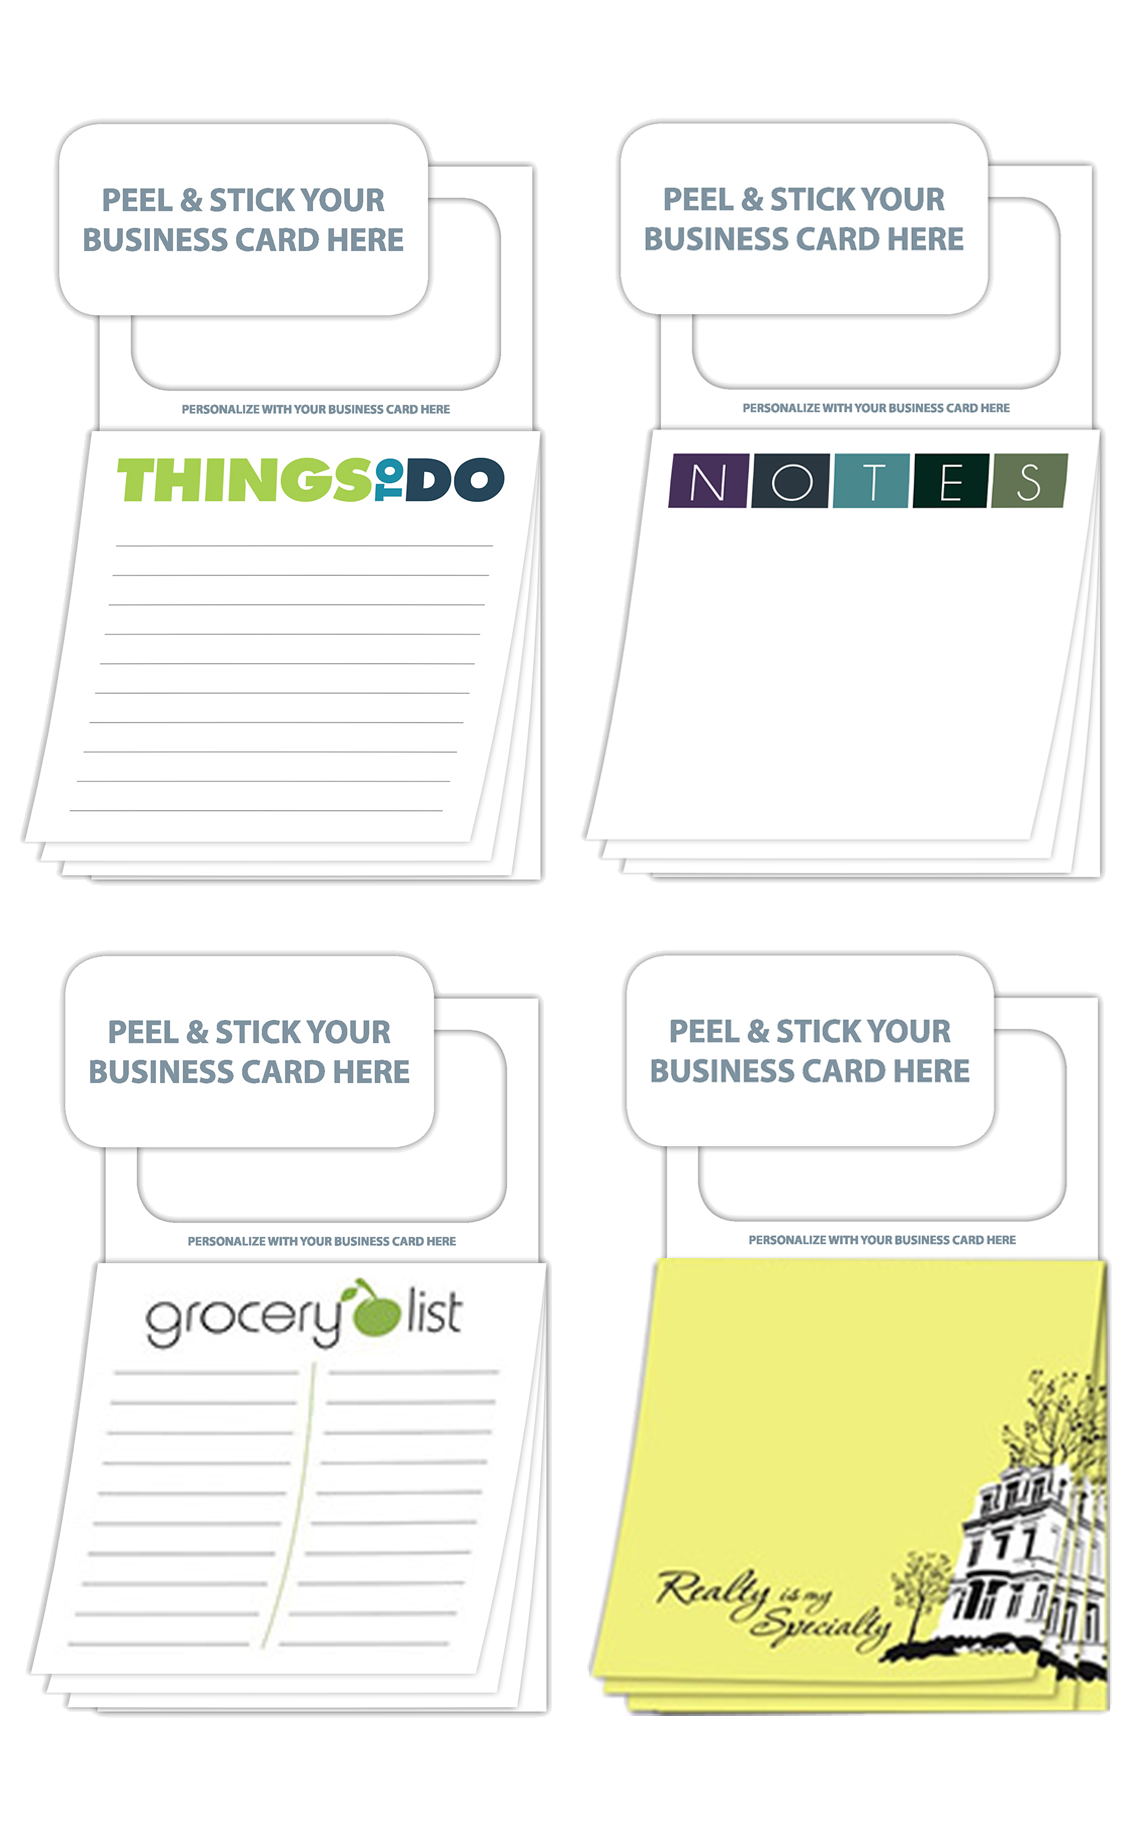  Realtor sticky notes make great real estate promotional items